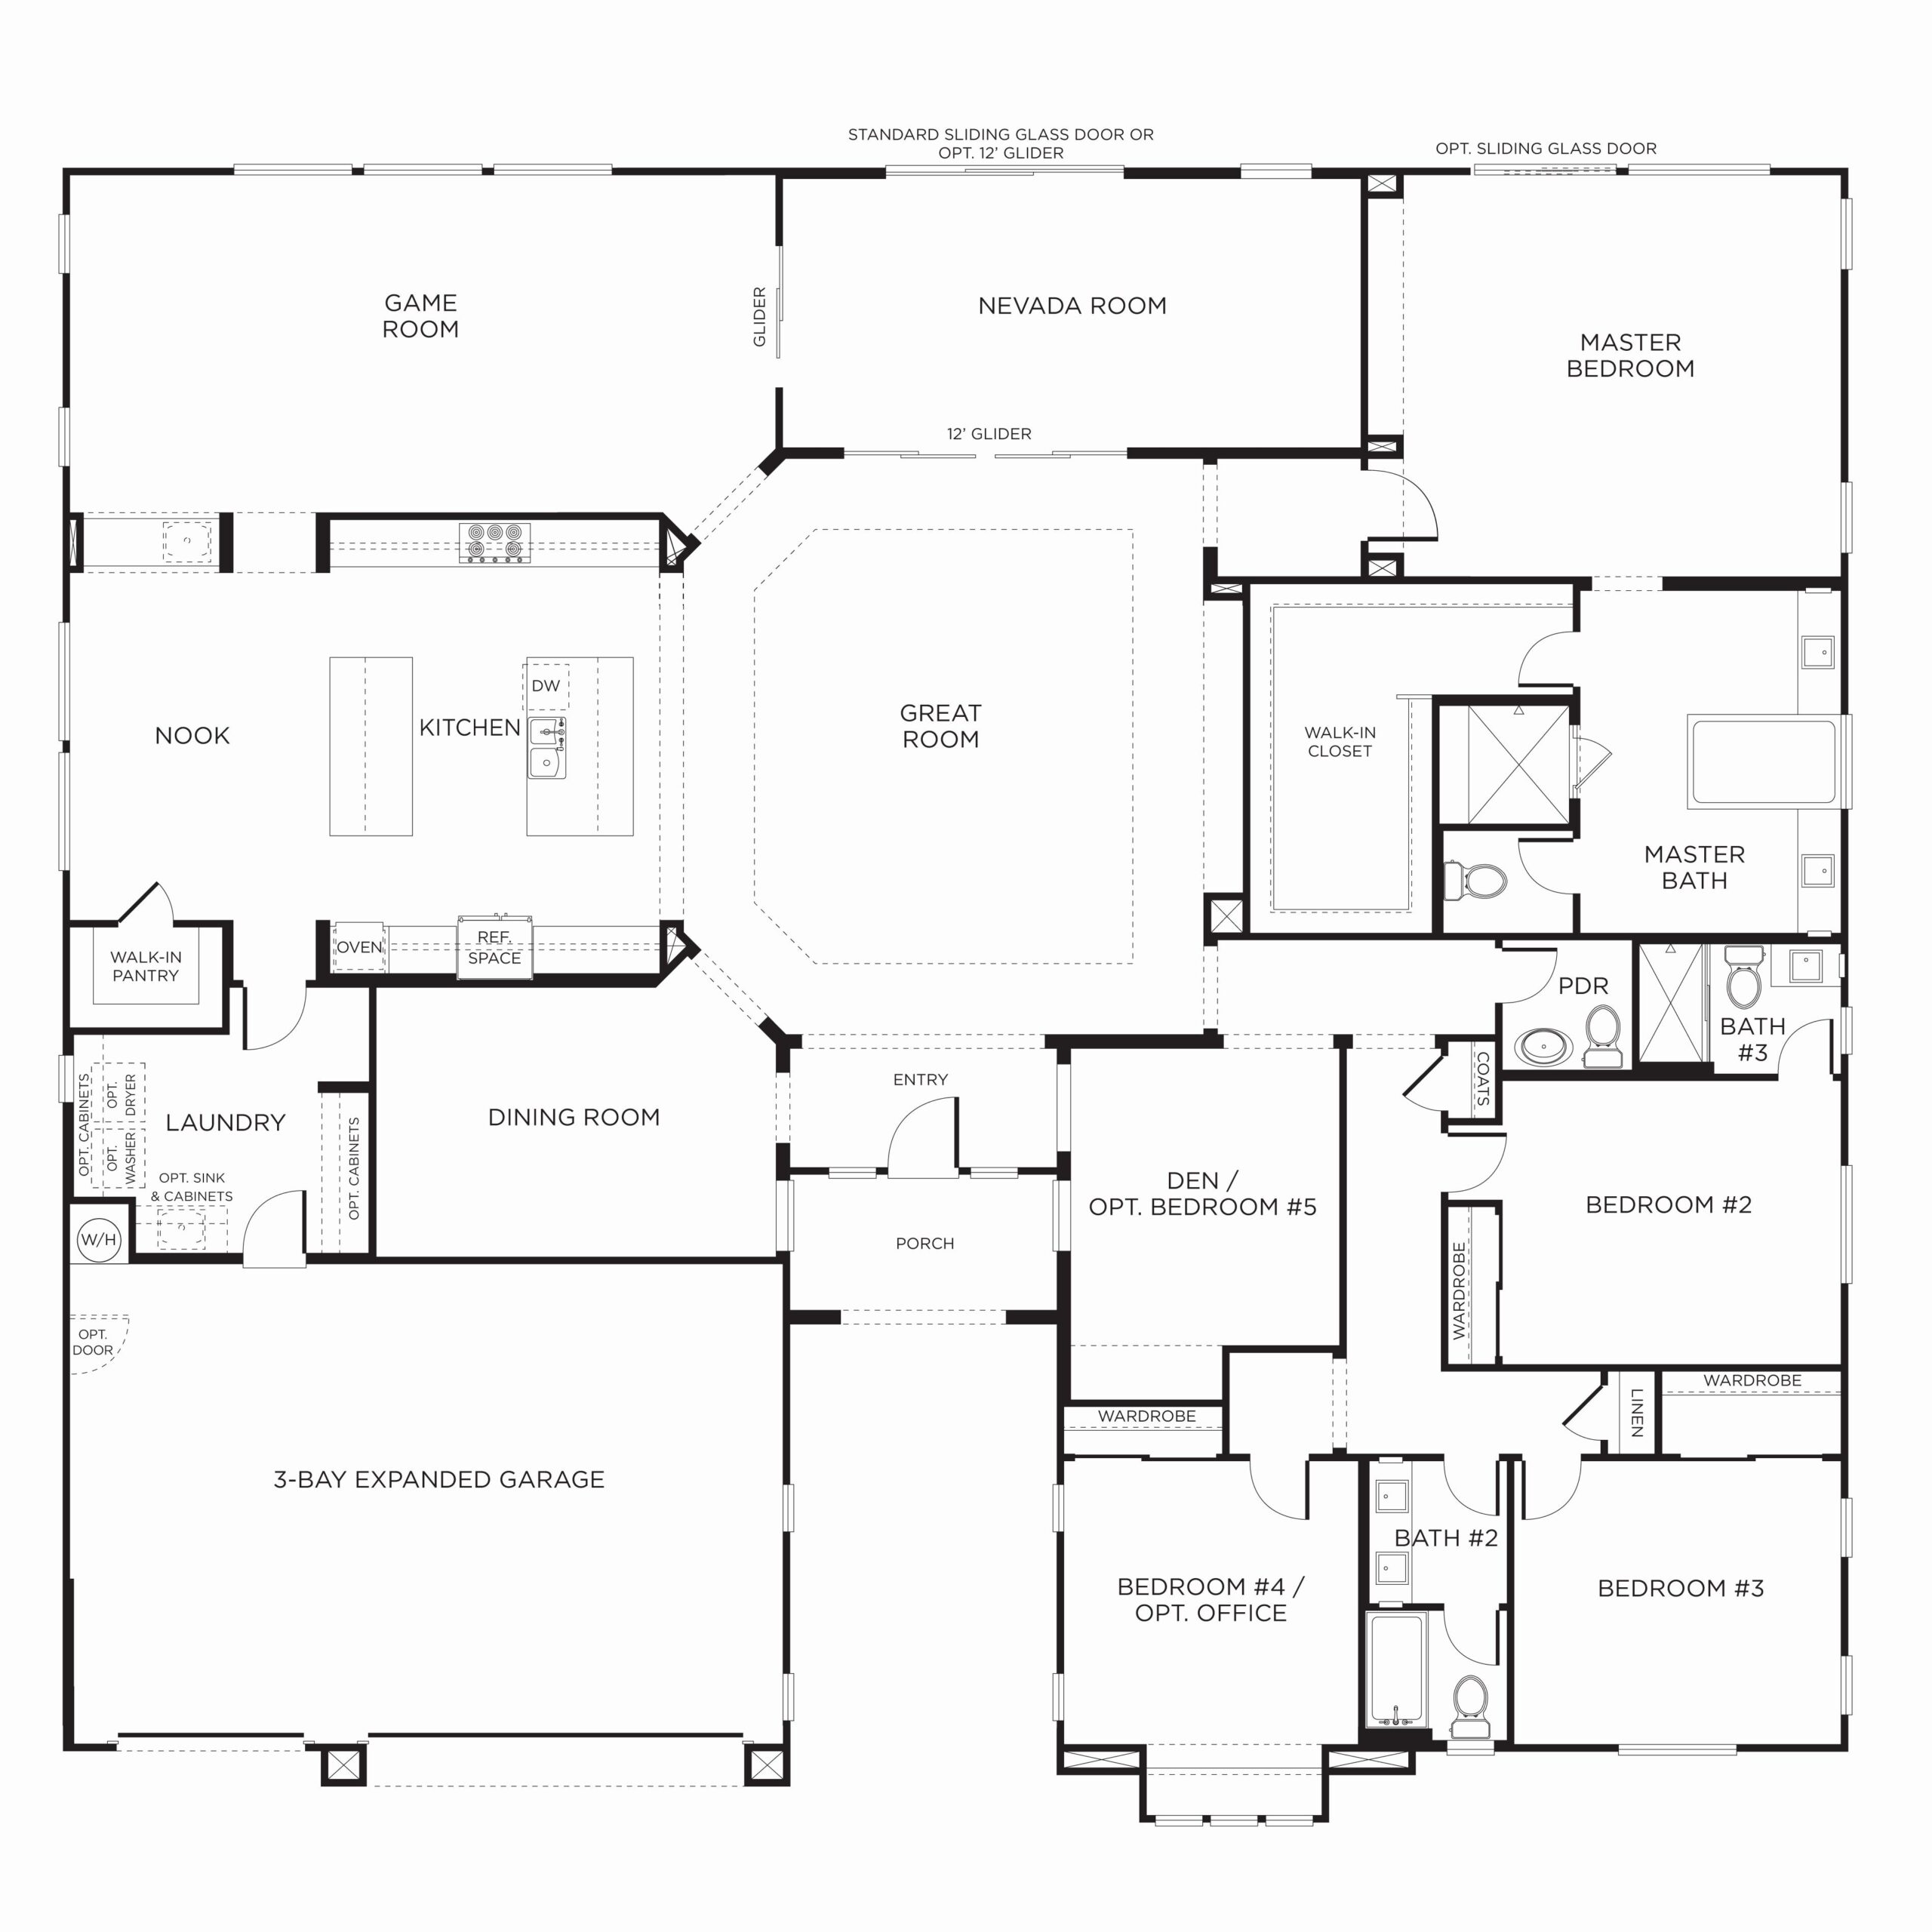 Inspiring image result for 5 bedroom open floor plans house plans one story throughout fascinating large open floor plans